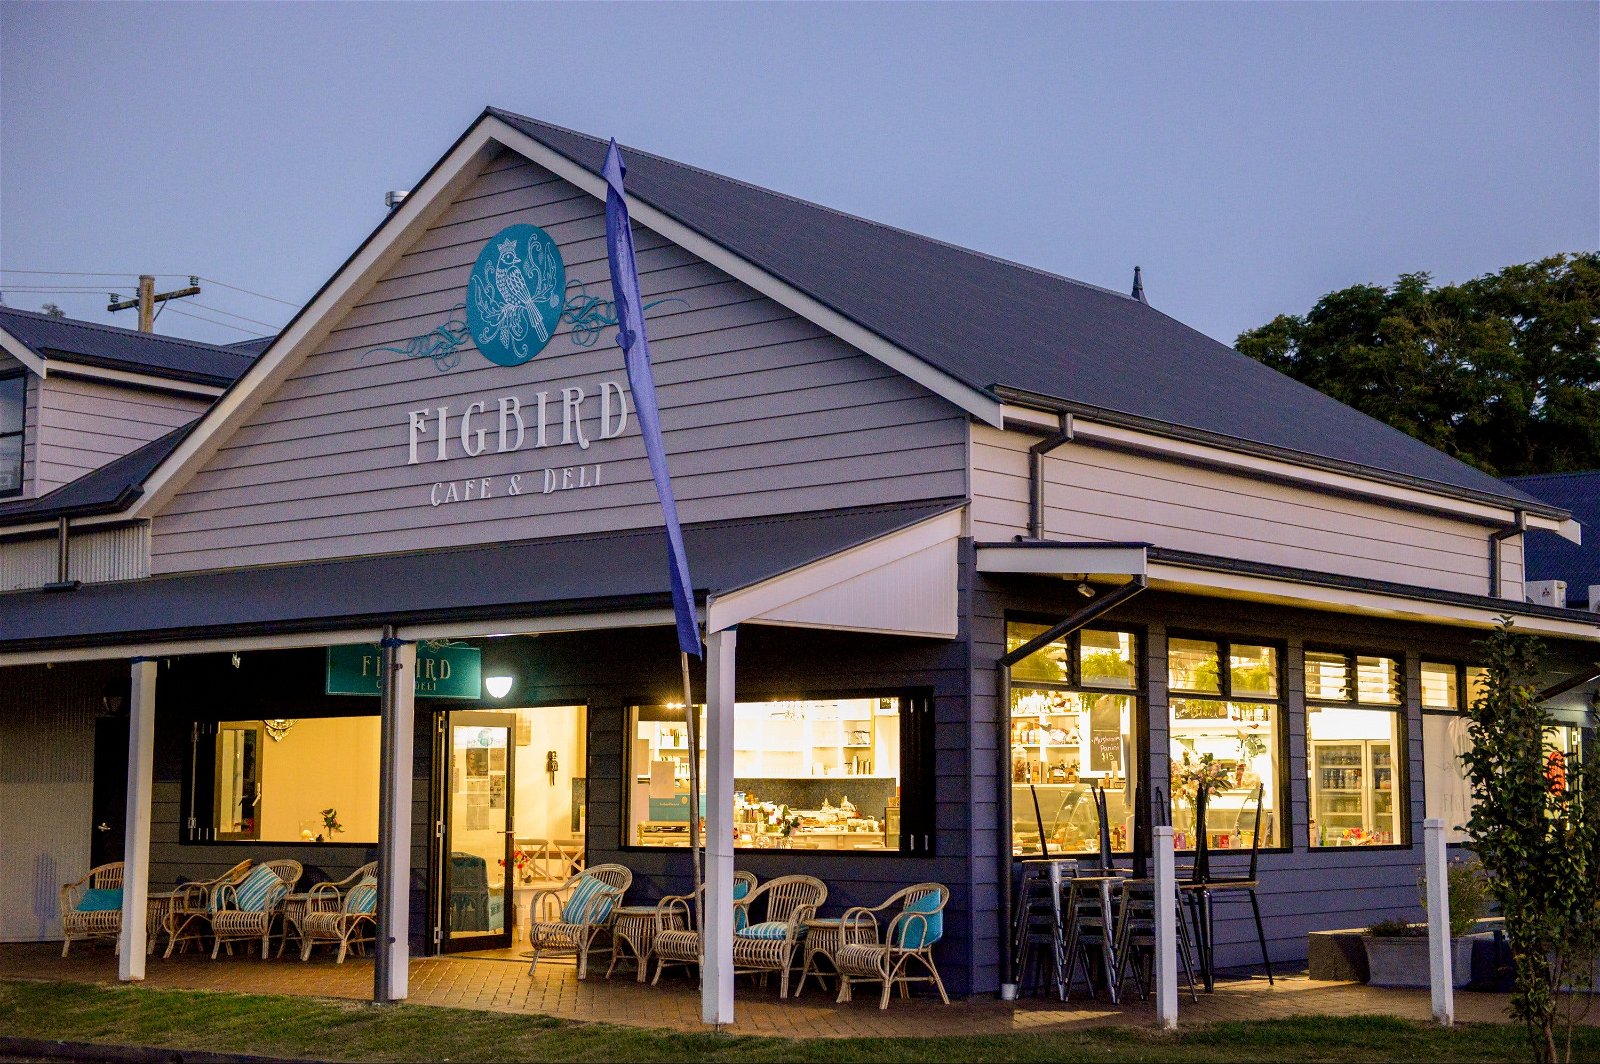 Figbird Cafe and Deli - New South Wales Tourism 